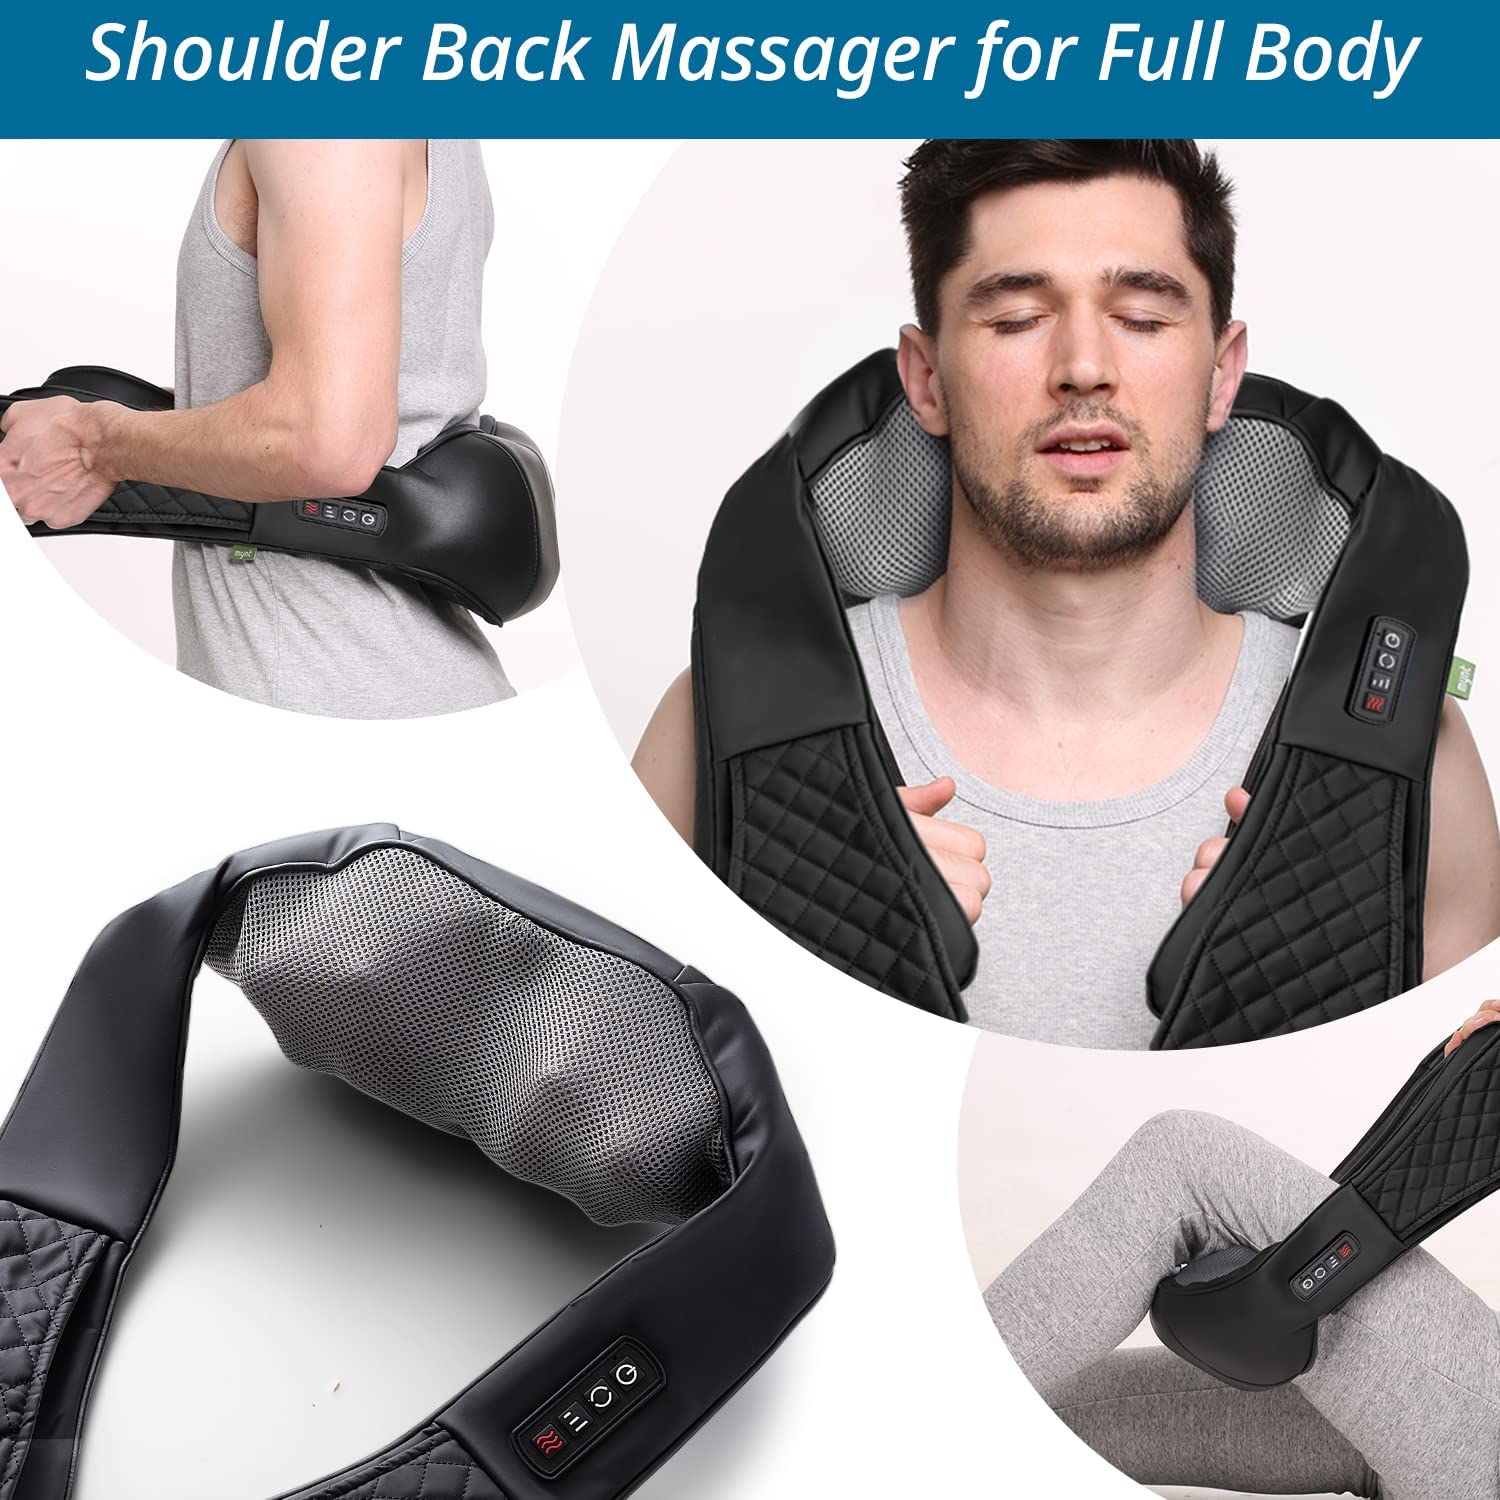 This back and neck heated massager is currently on sale